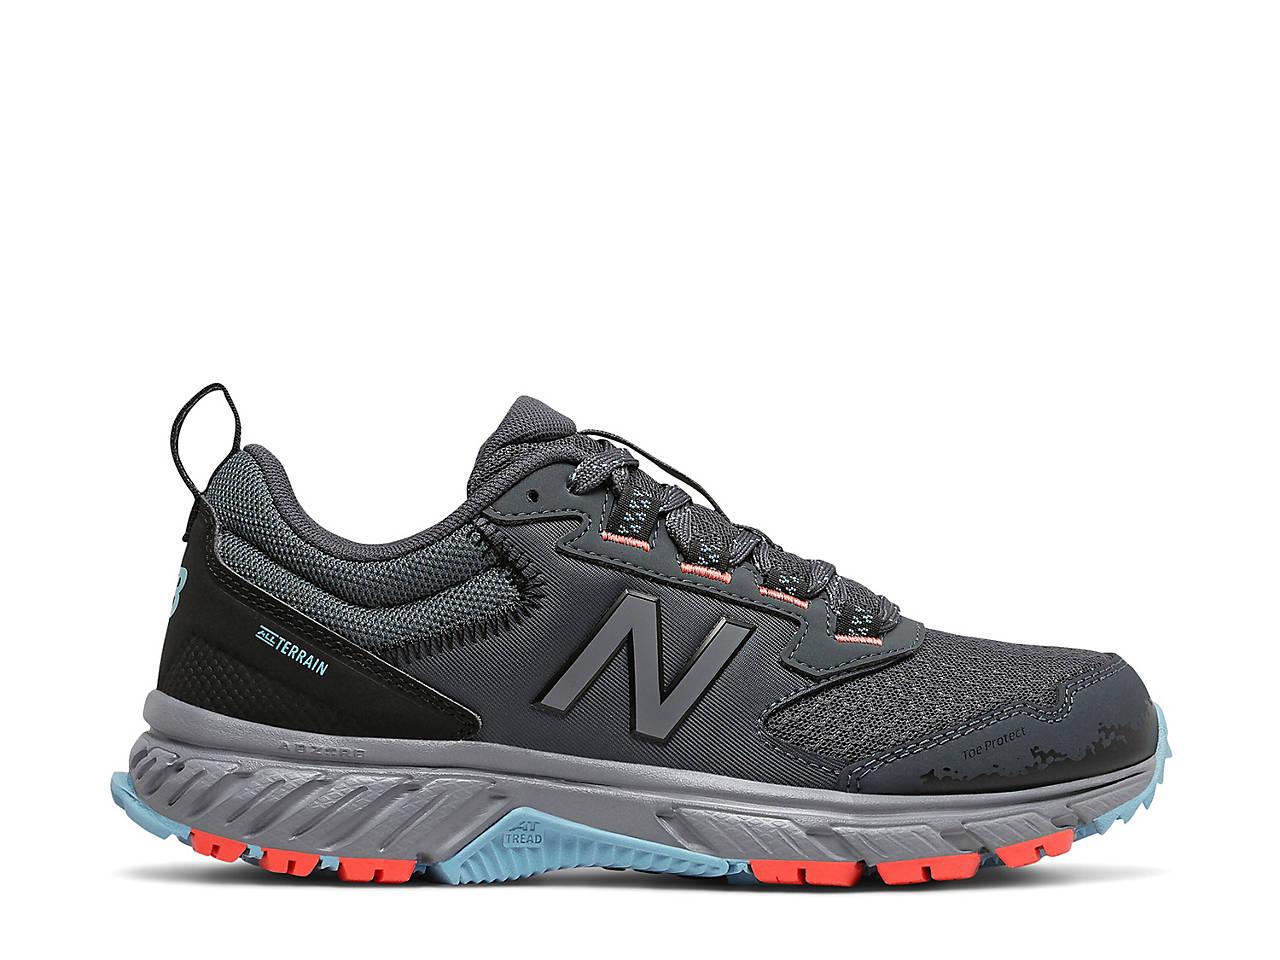 New Balance Leather 510 V5 Trail Running Shoe in Grey/Blue/Red (Gray ...